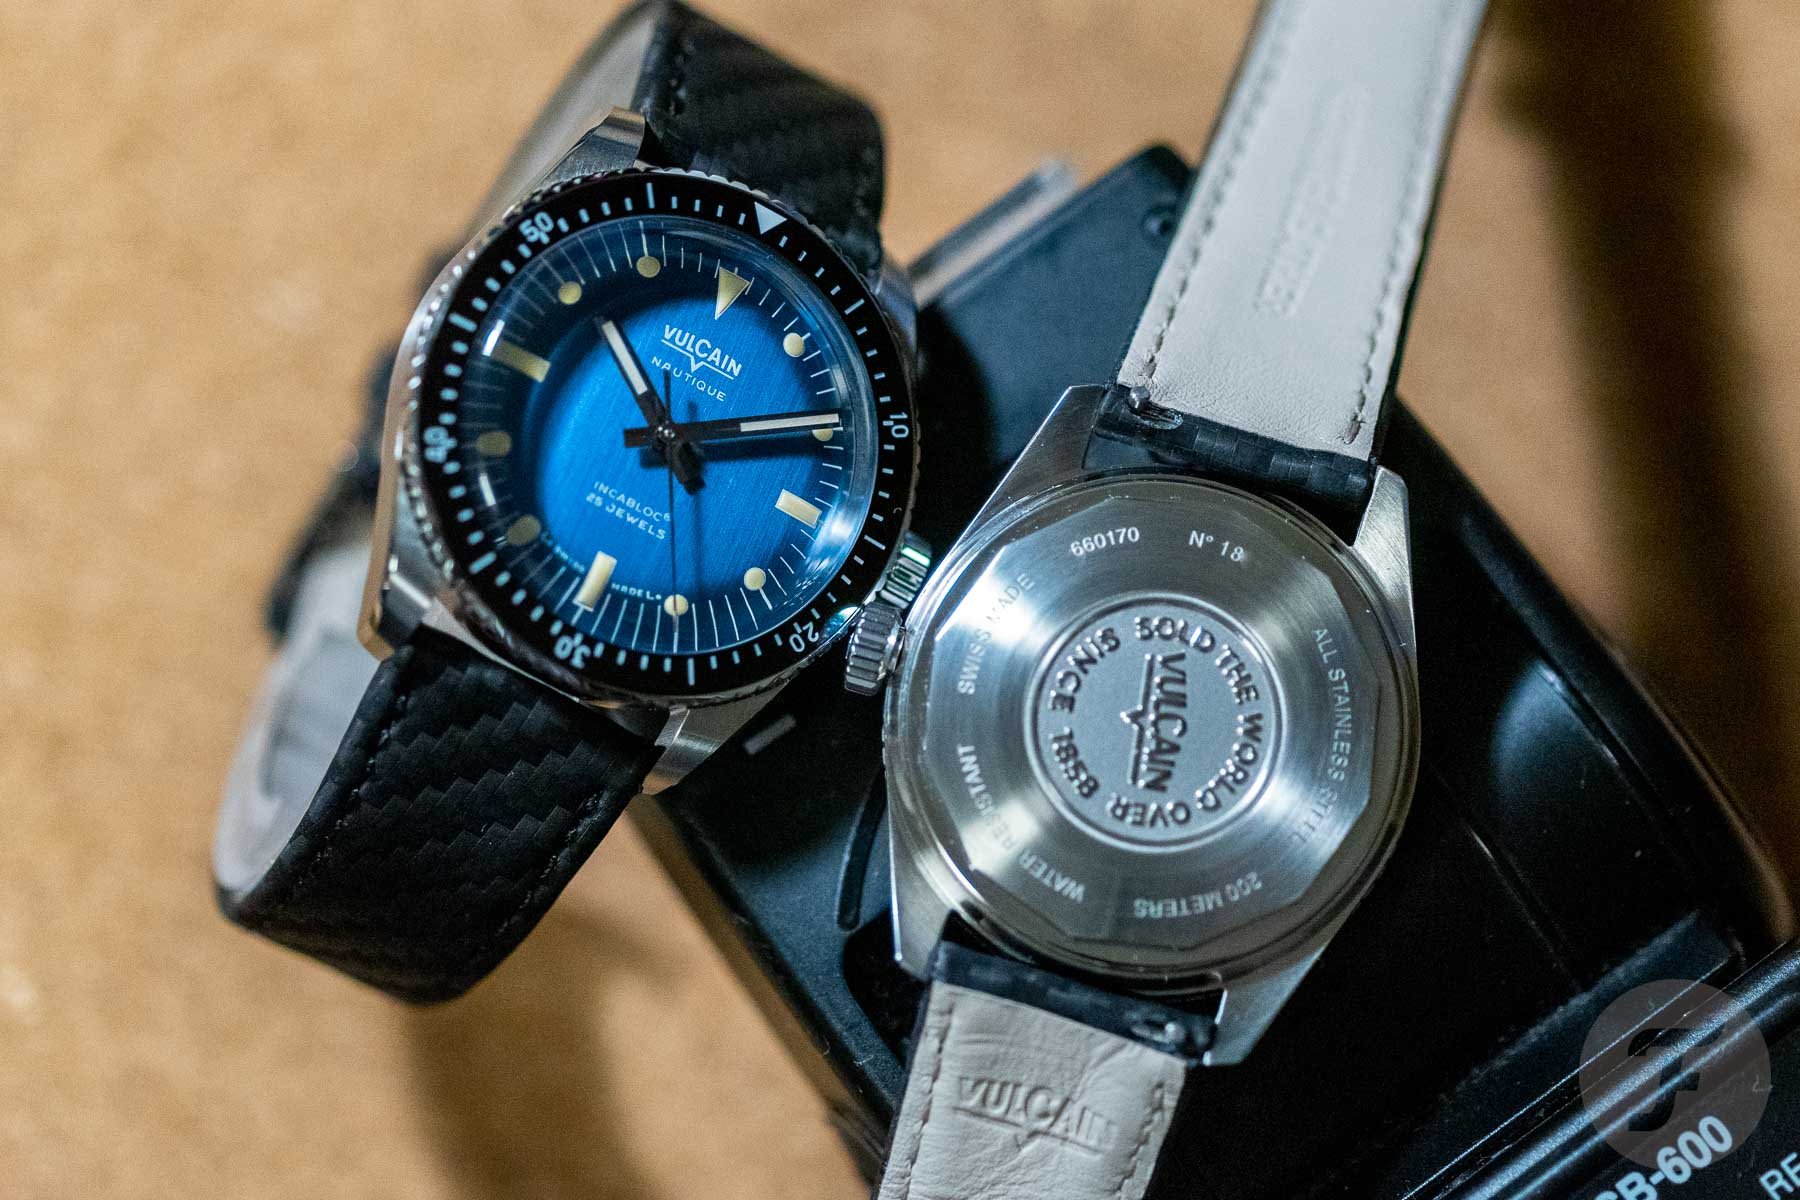 【F】 Launching Today: The New Vulcain Skindiver — Hands-On